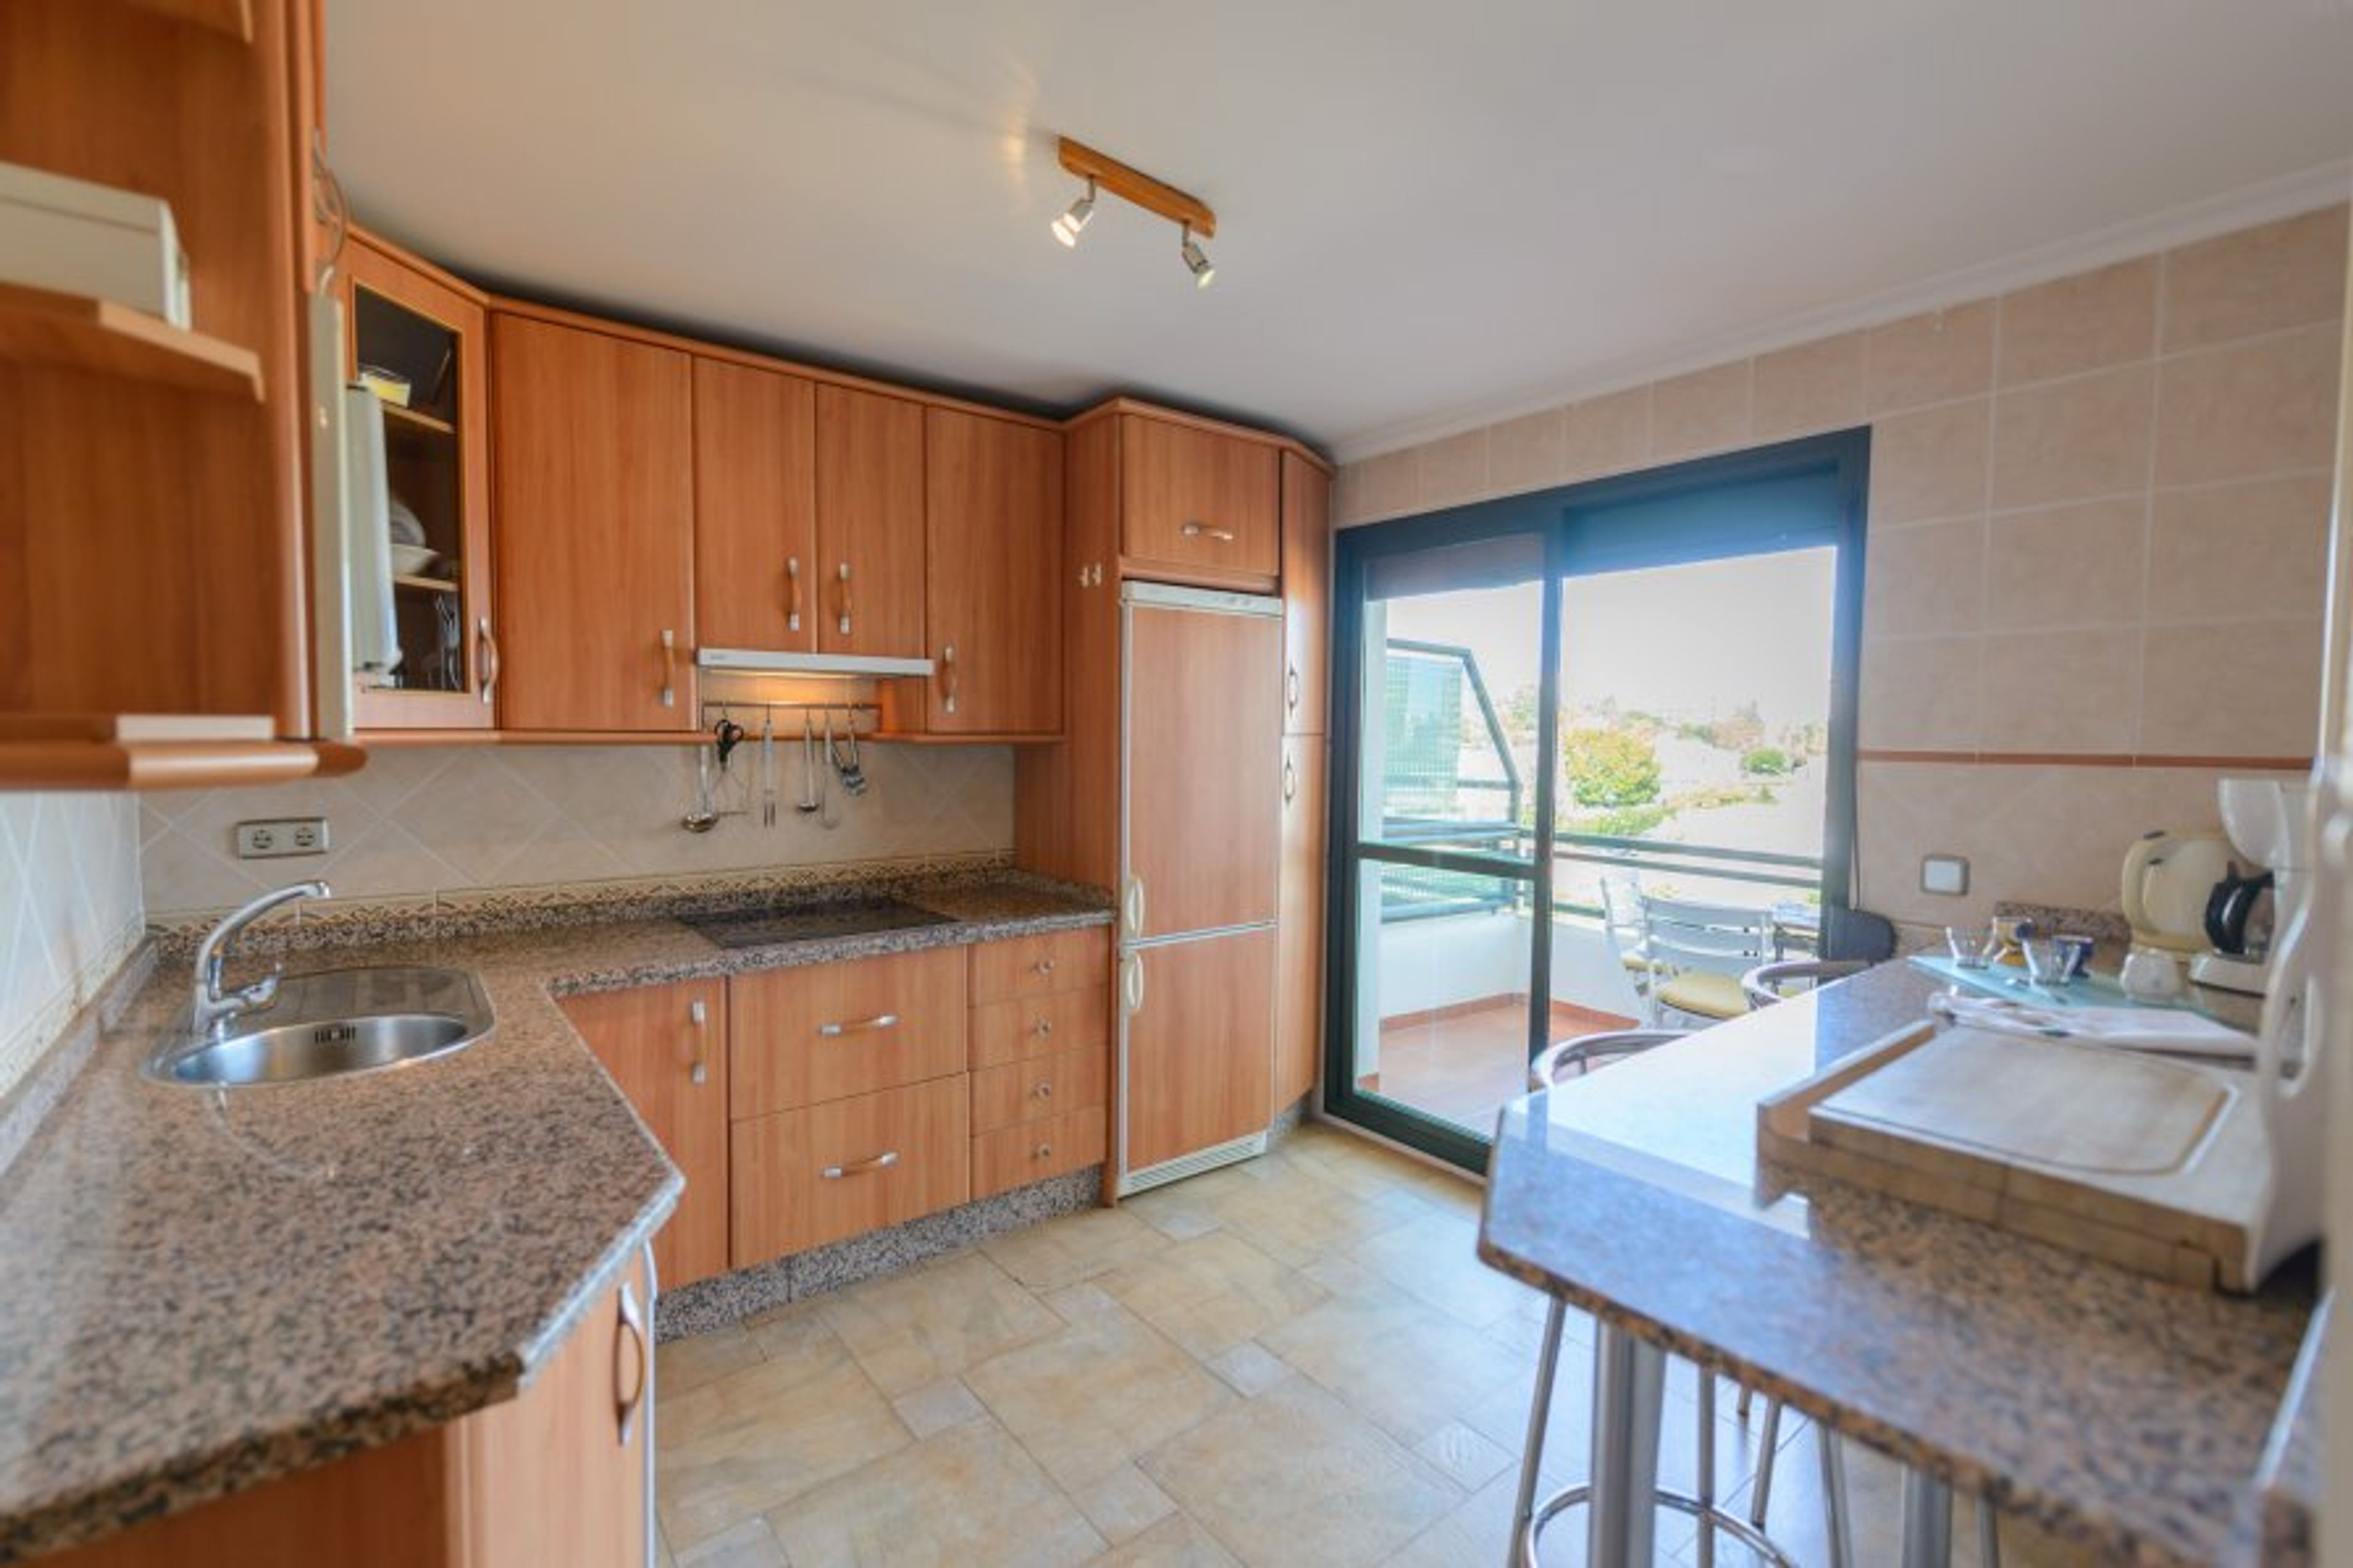 Fully equipped kitchen and doors to the second terrace